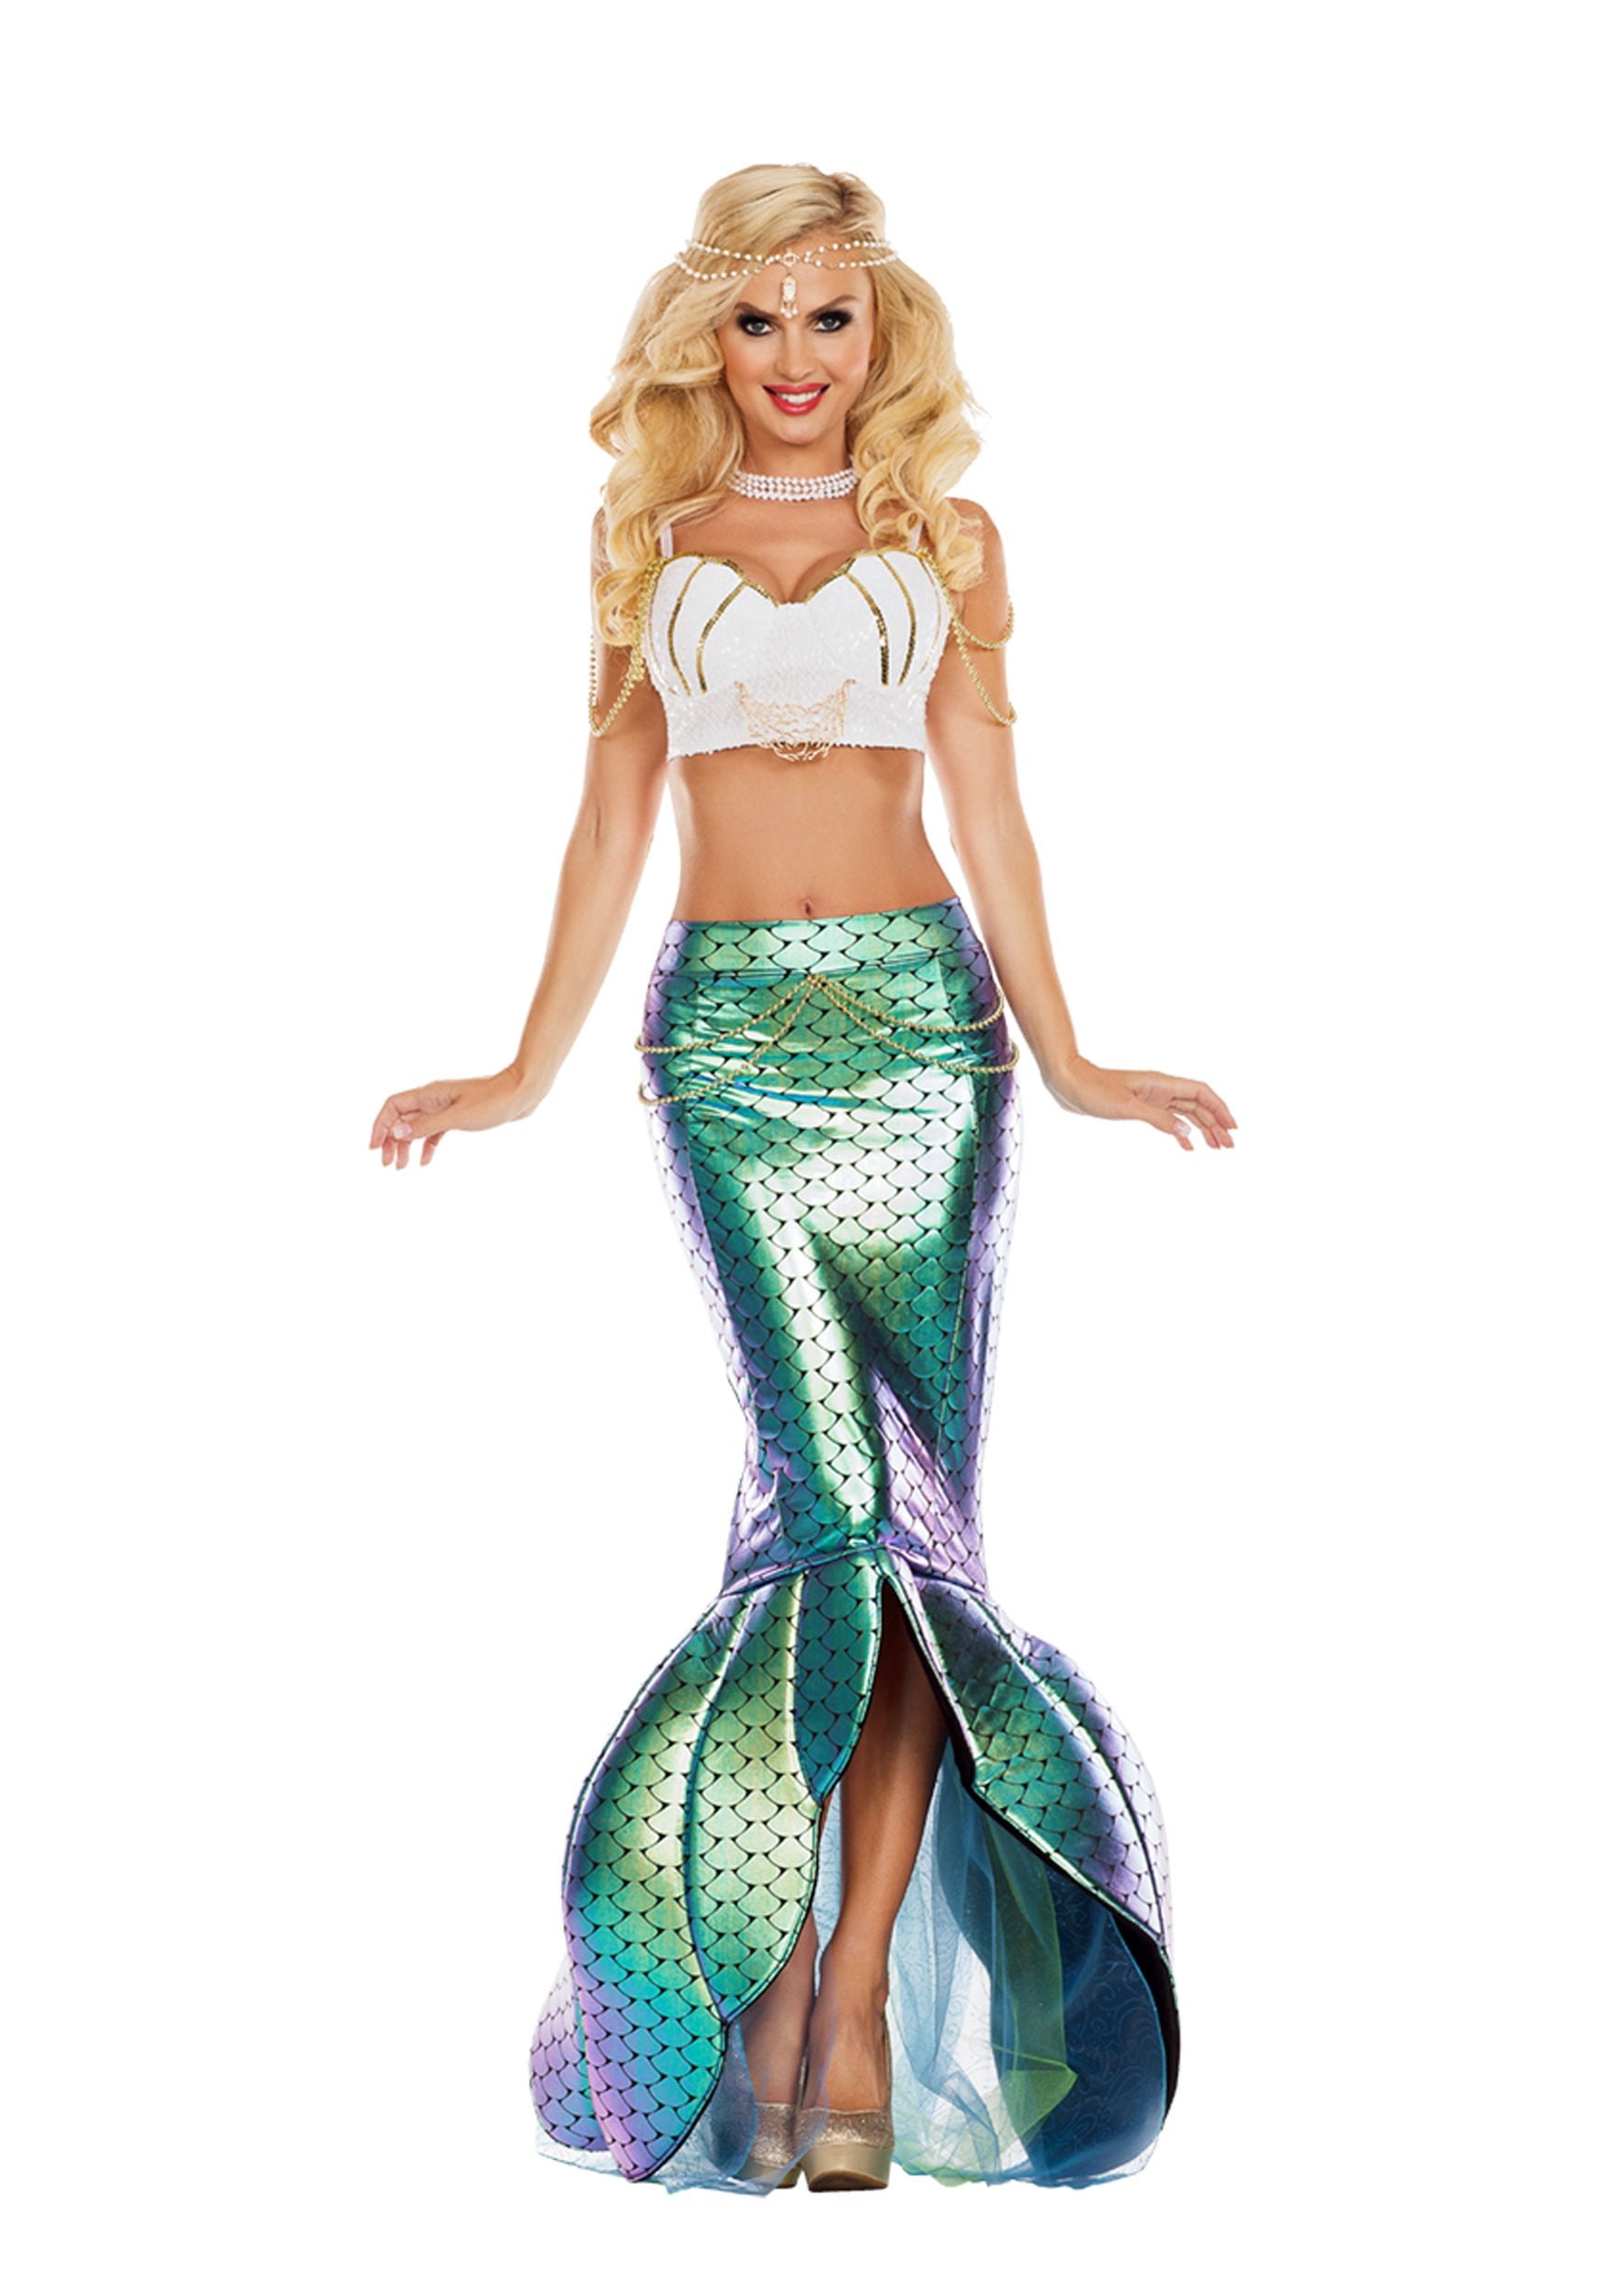 Photo 1 of Under the Sea Mermaid Costume for Women
SIZE LARGE 